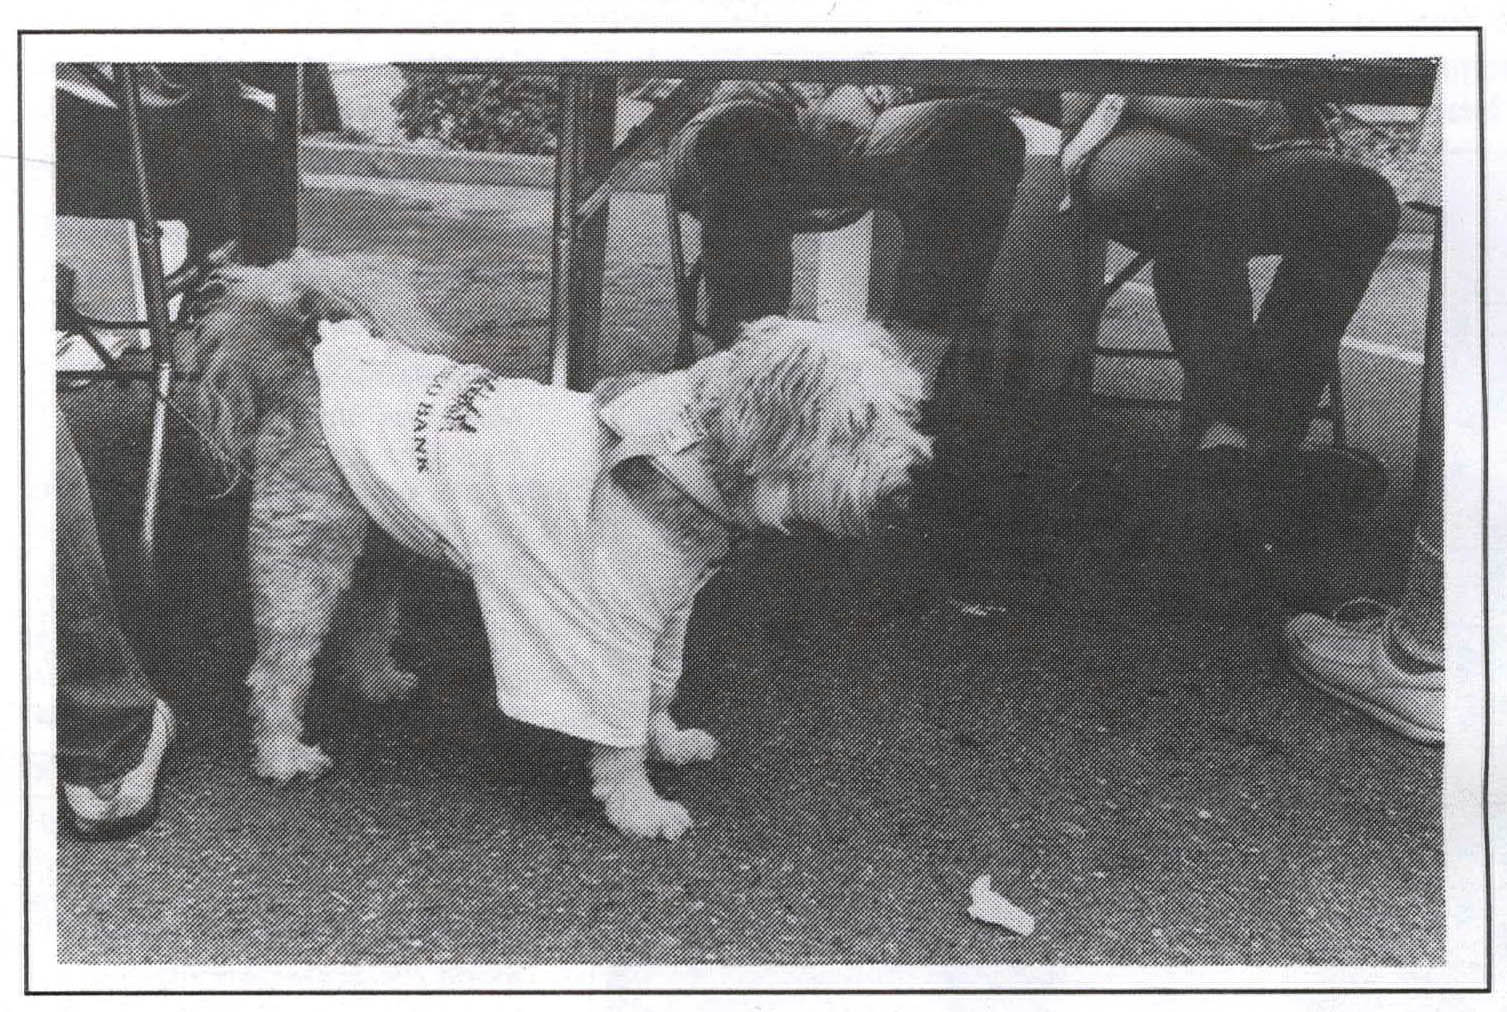 A small dog dressed in a Wells Fargo bank shirt waits next to a table with seated people. It is assumed that this table is a Wells Fargo booth at an AIDS walk.